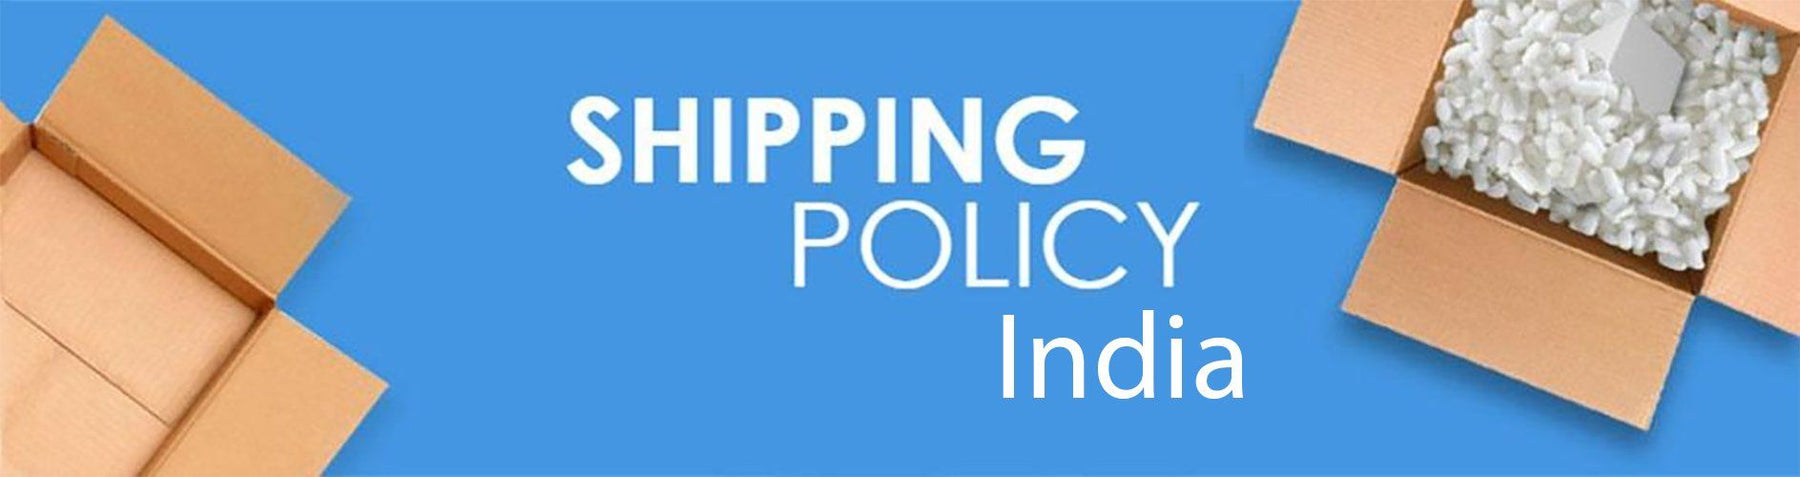 Shipping Policy For Indian Shipments